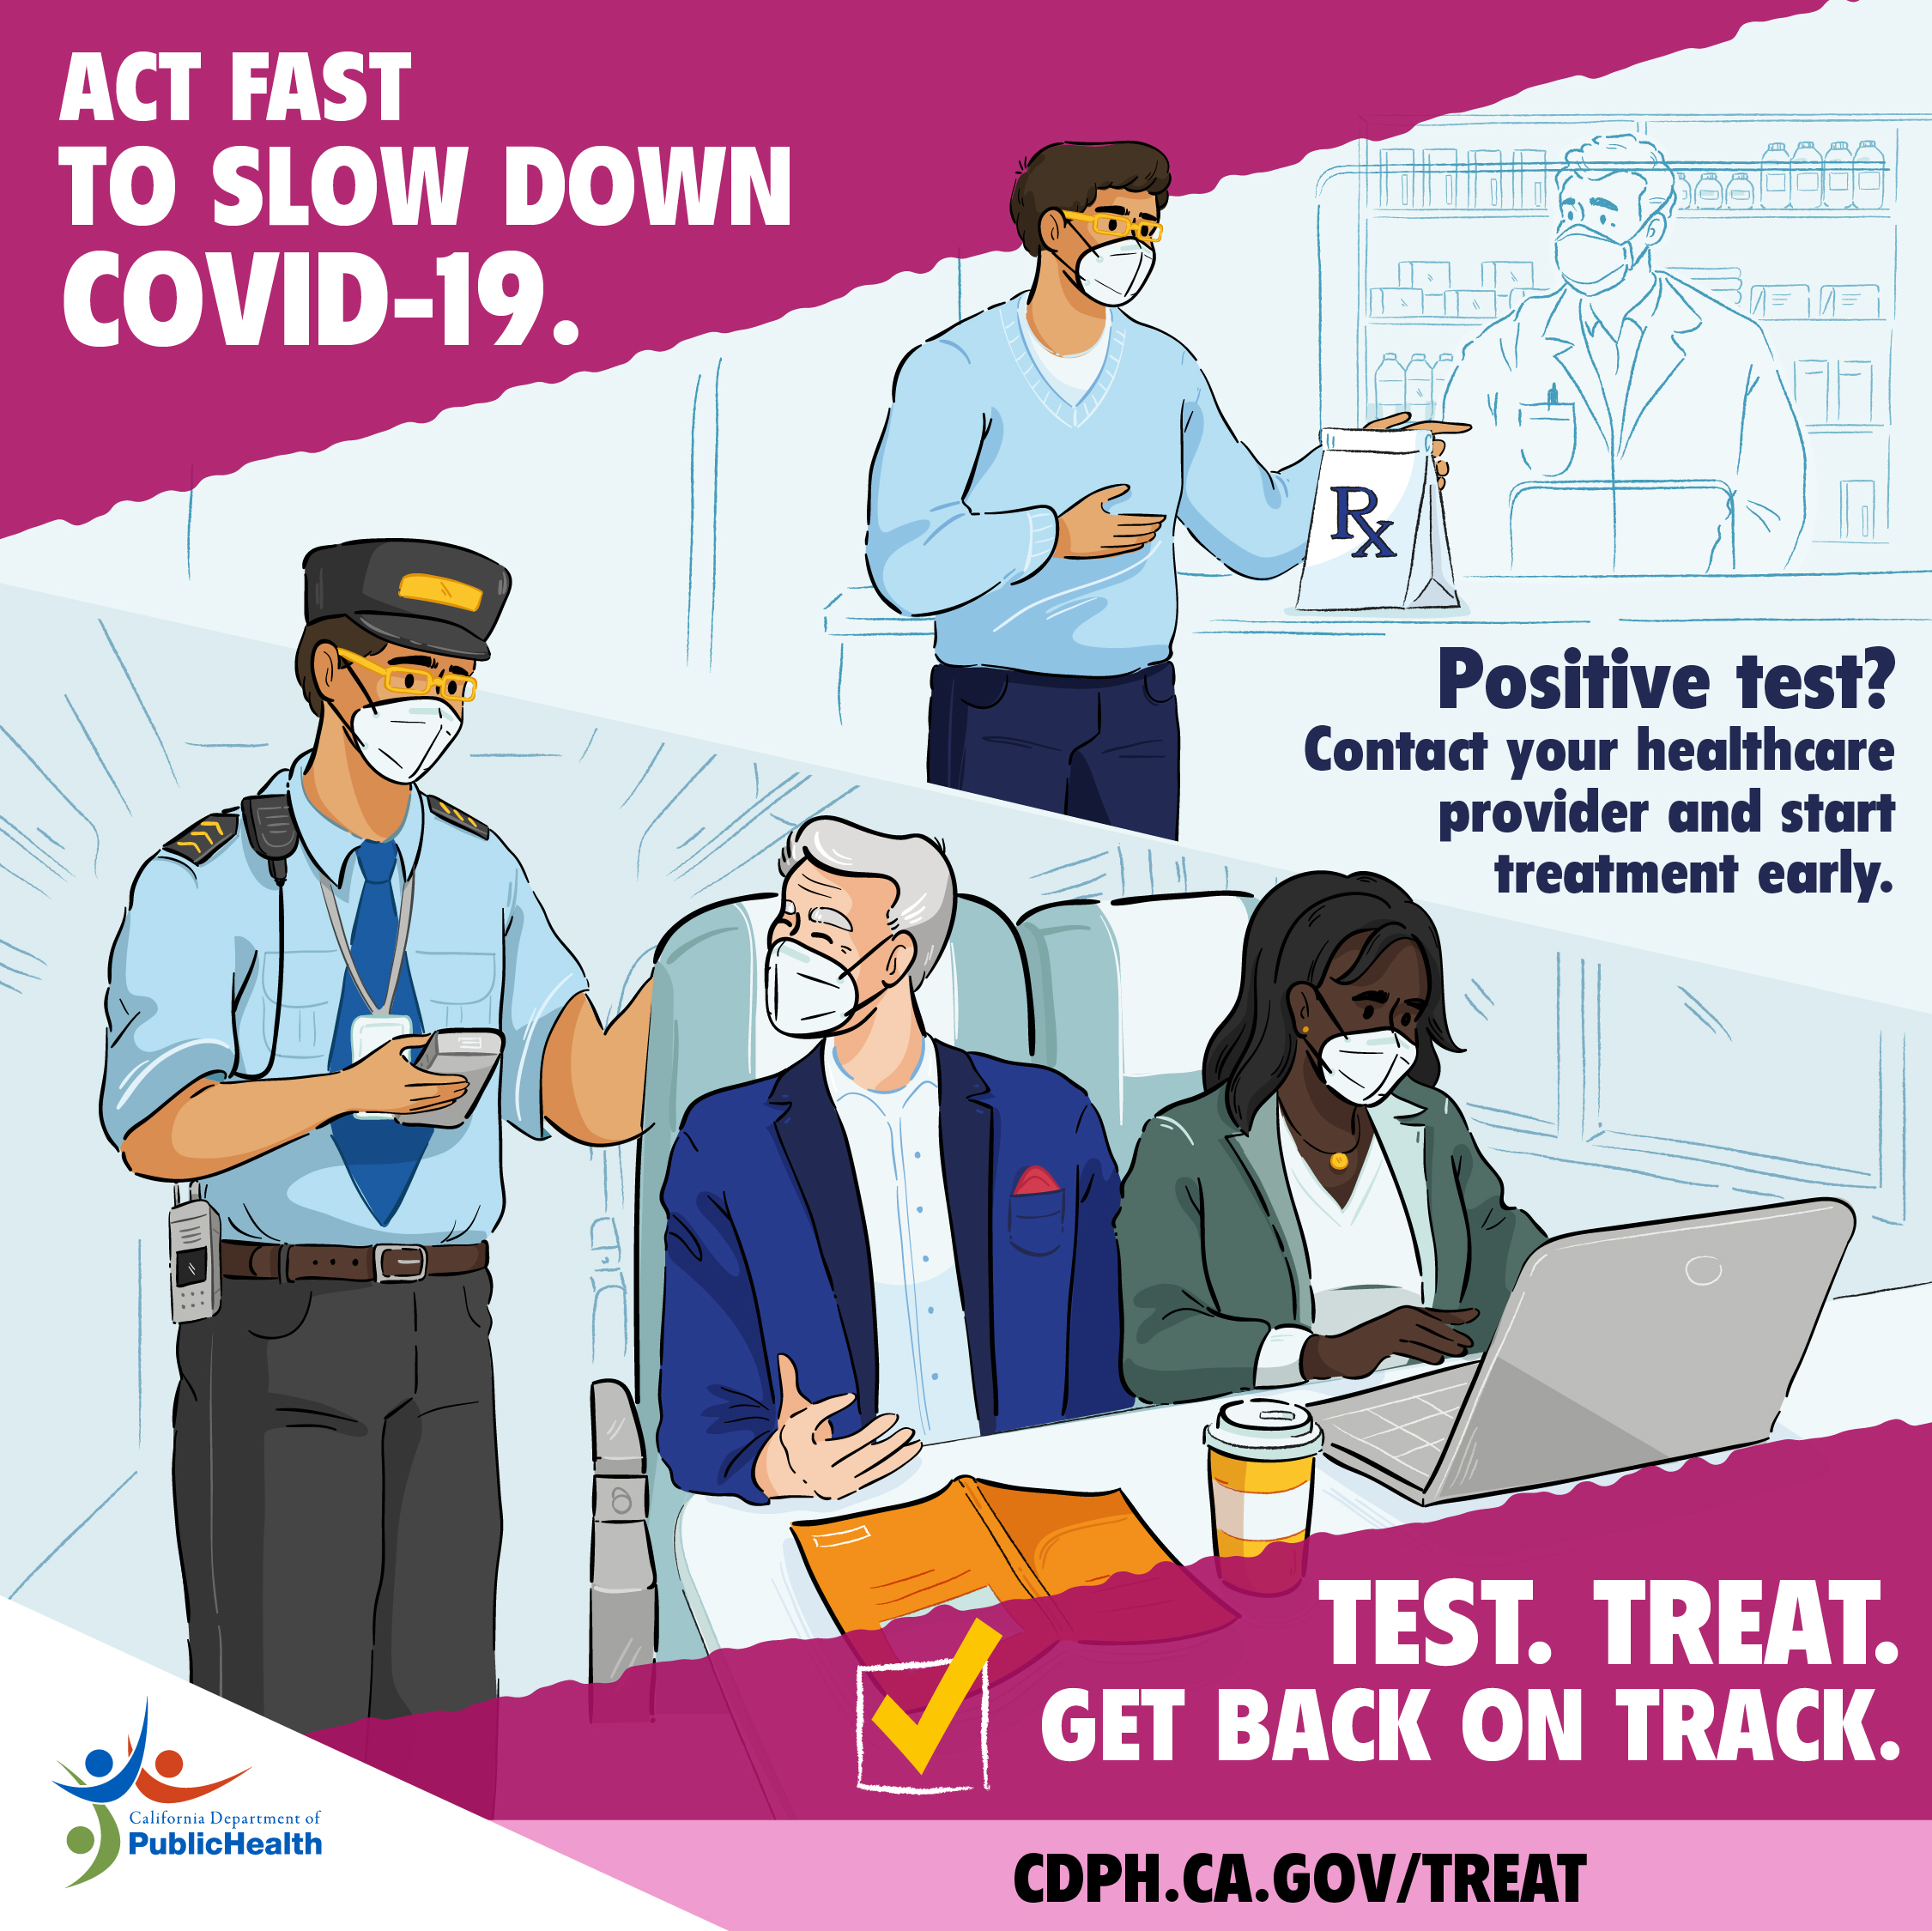 Man picking up prescription. In another scene, the same man is seen at work collecting tickets on a train. Text: Act fast to slow down COVID-19